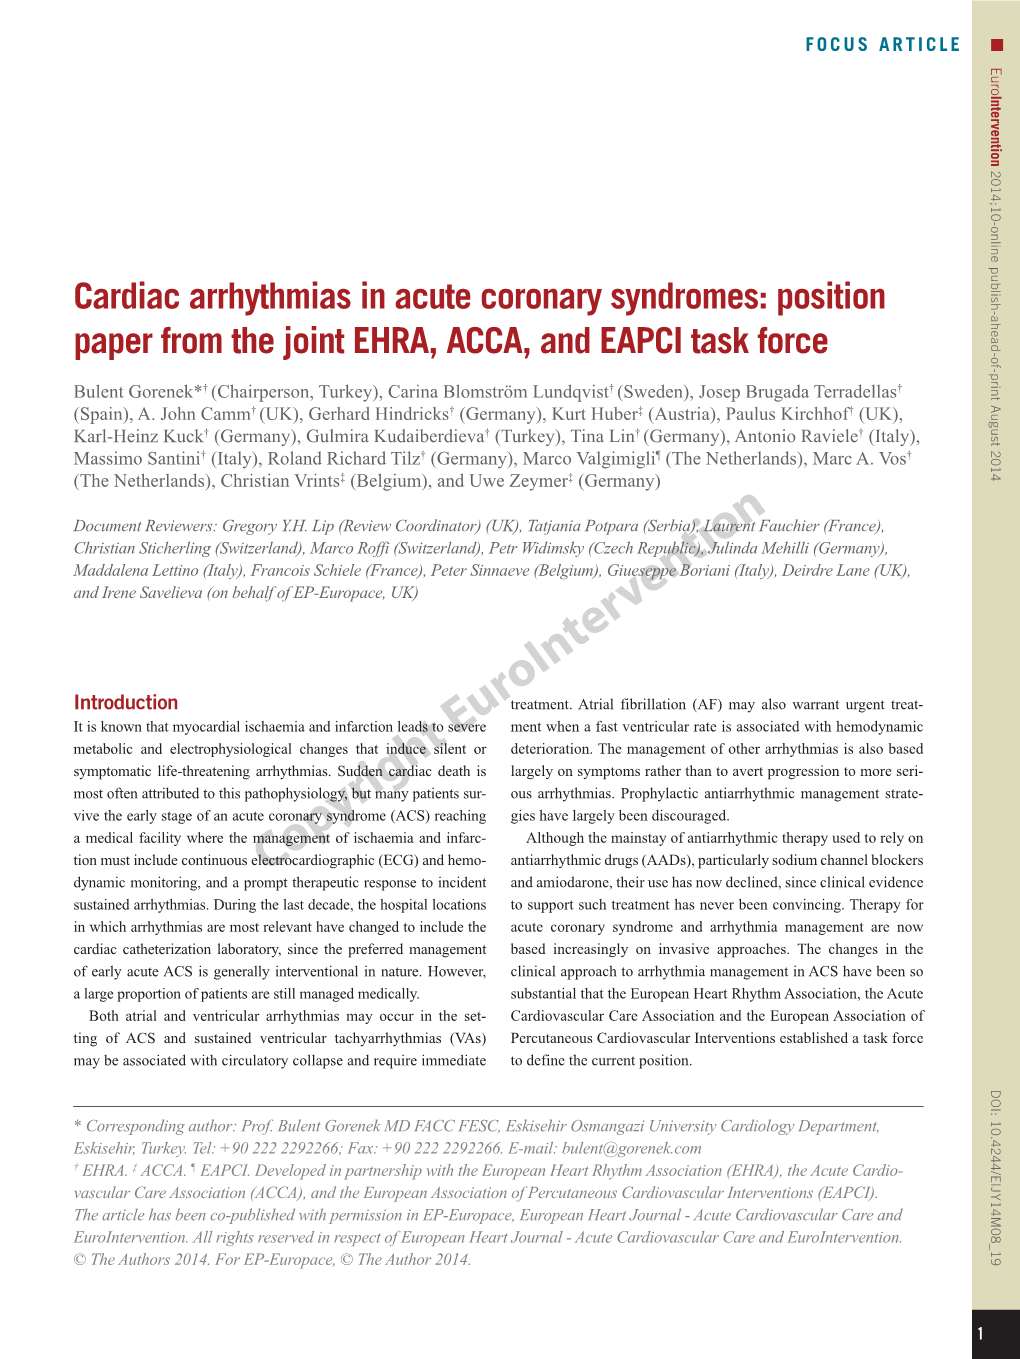 Cardiac Arrhythmias in Acute Coronary Syndromes: Position Paper from the Joint EHRA, ACCA, and EAPCI Task Force